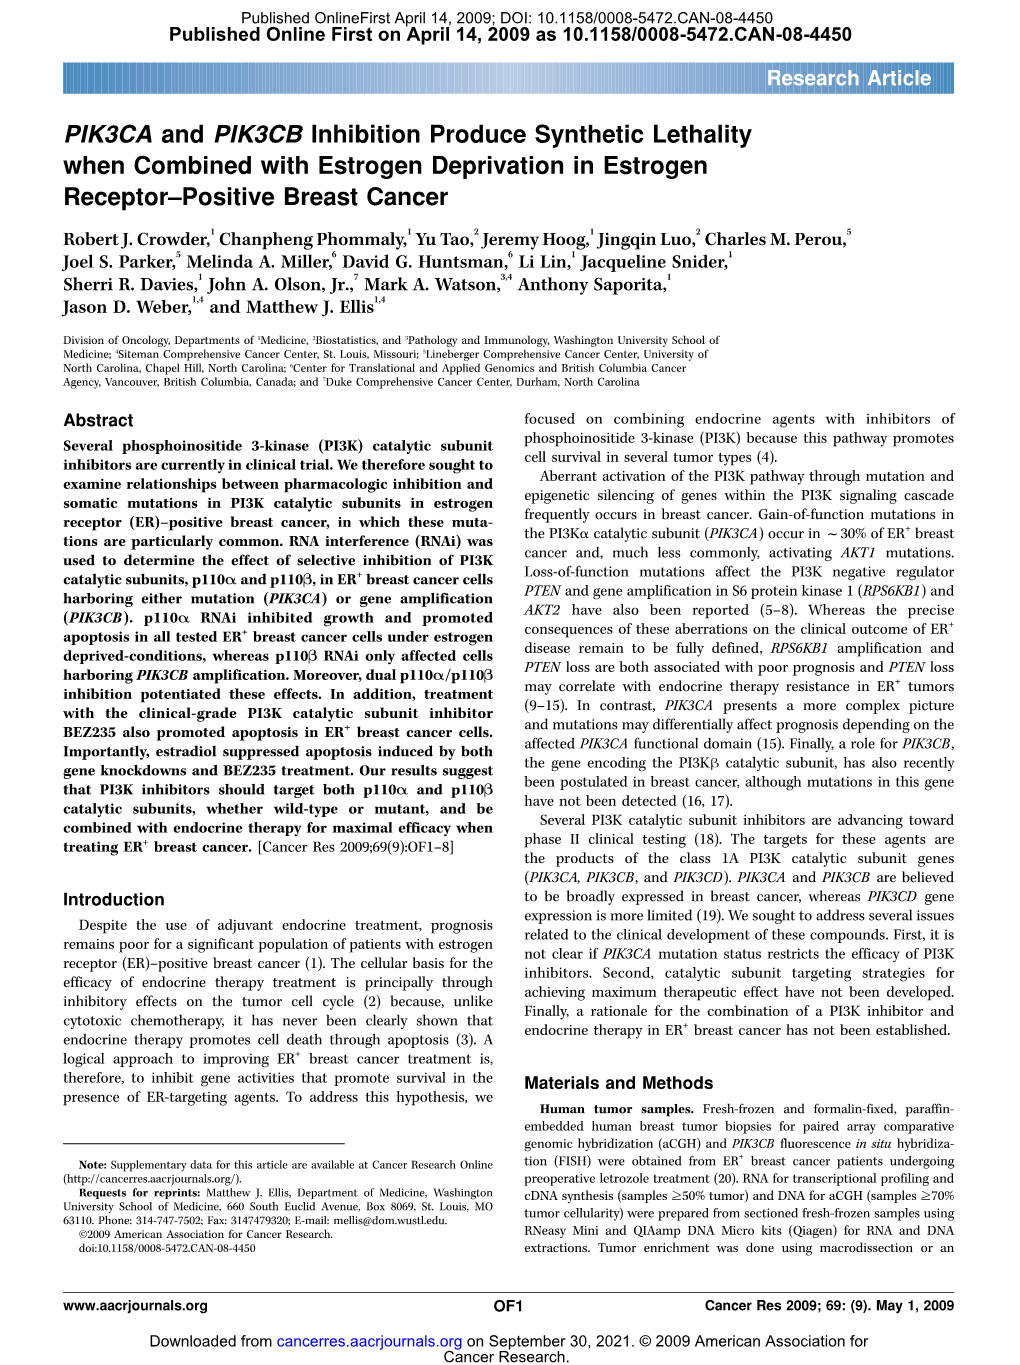 PIK3CA and PIK3CB Inhibition Produce Synthetic Lethality When Combined with Estrogen Deprivation in Estrogen Receptor–Positive Breast Cancer